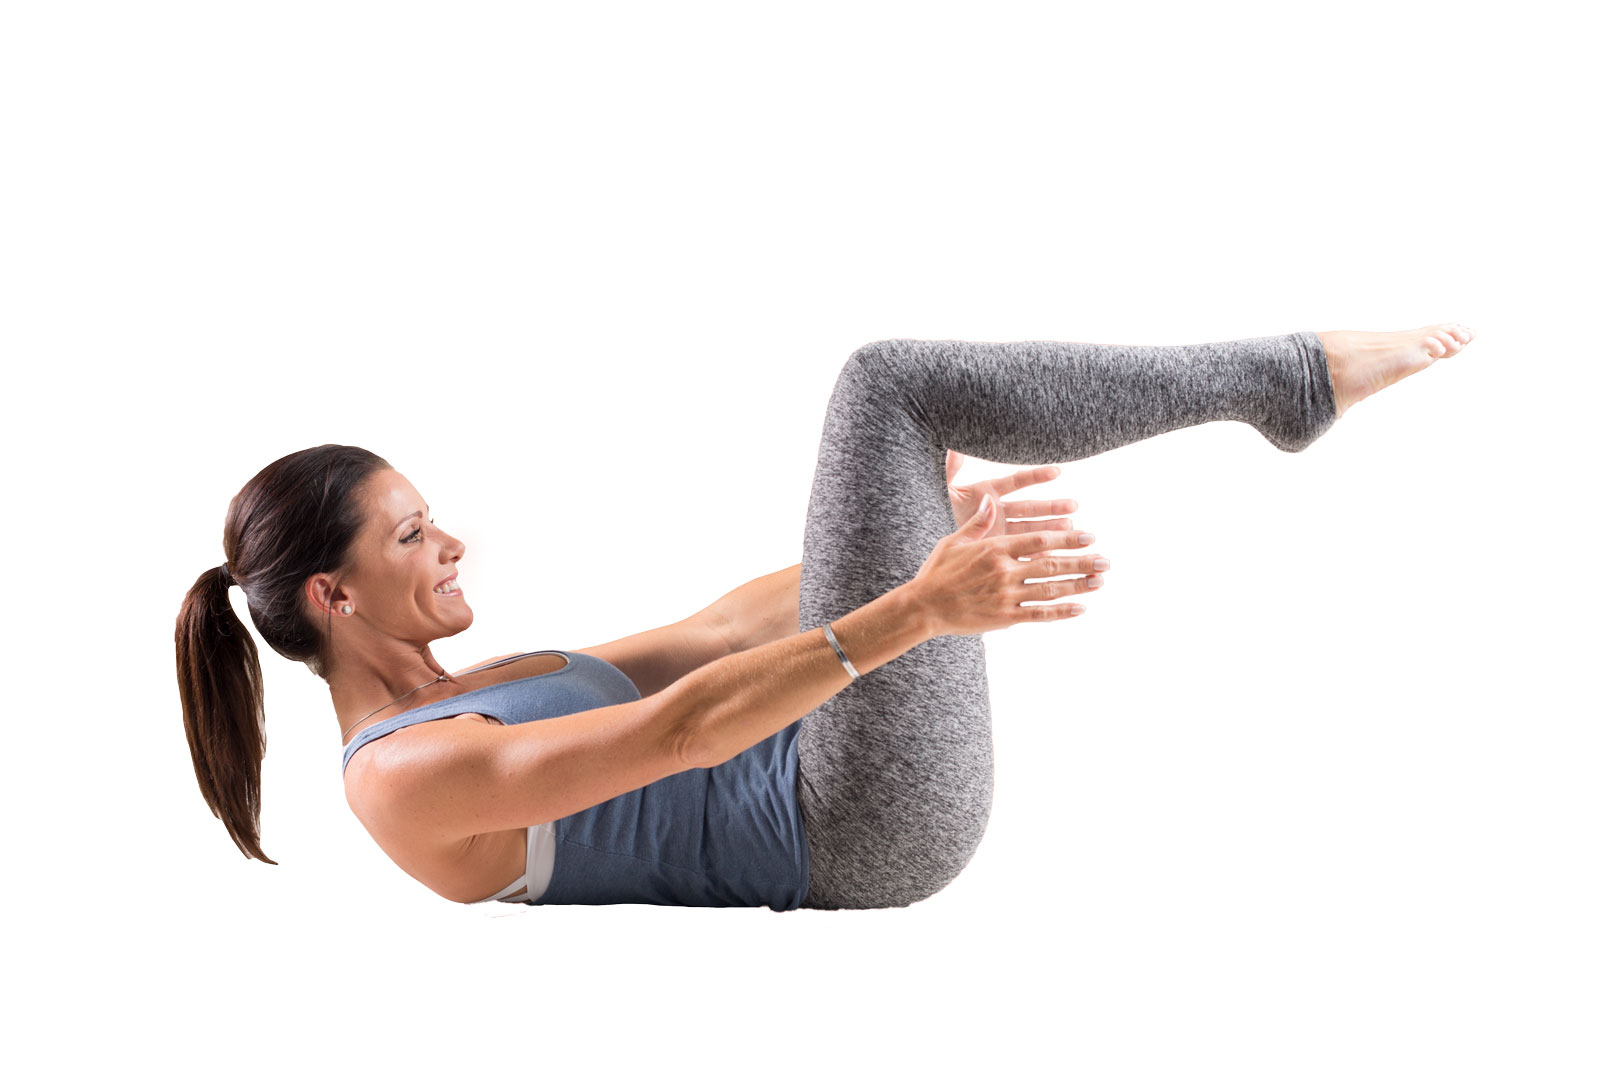 Try These Pilates Moves to Strengthen Your Core and Increase